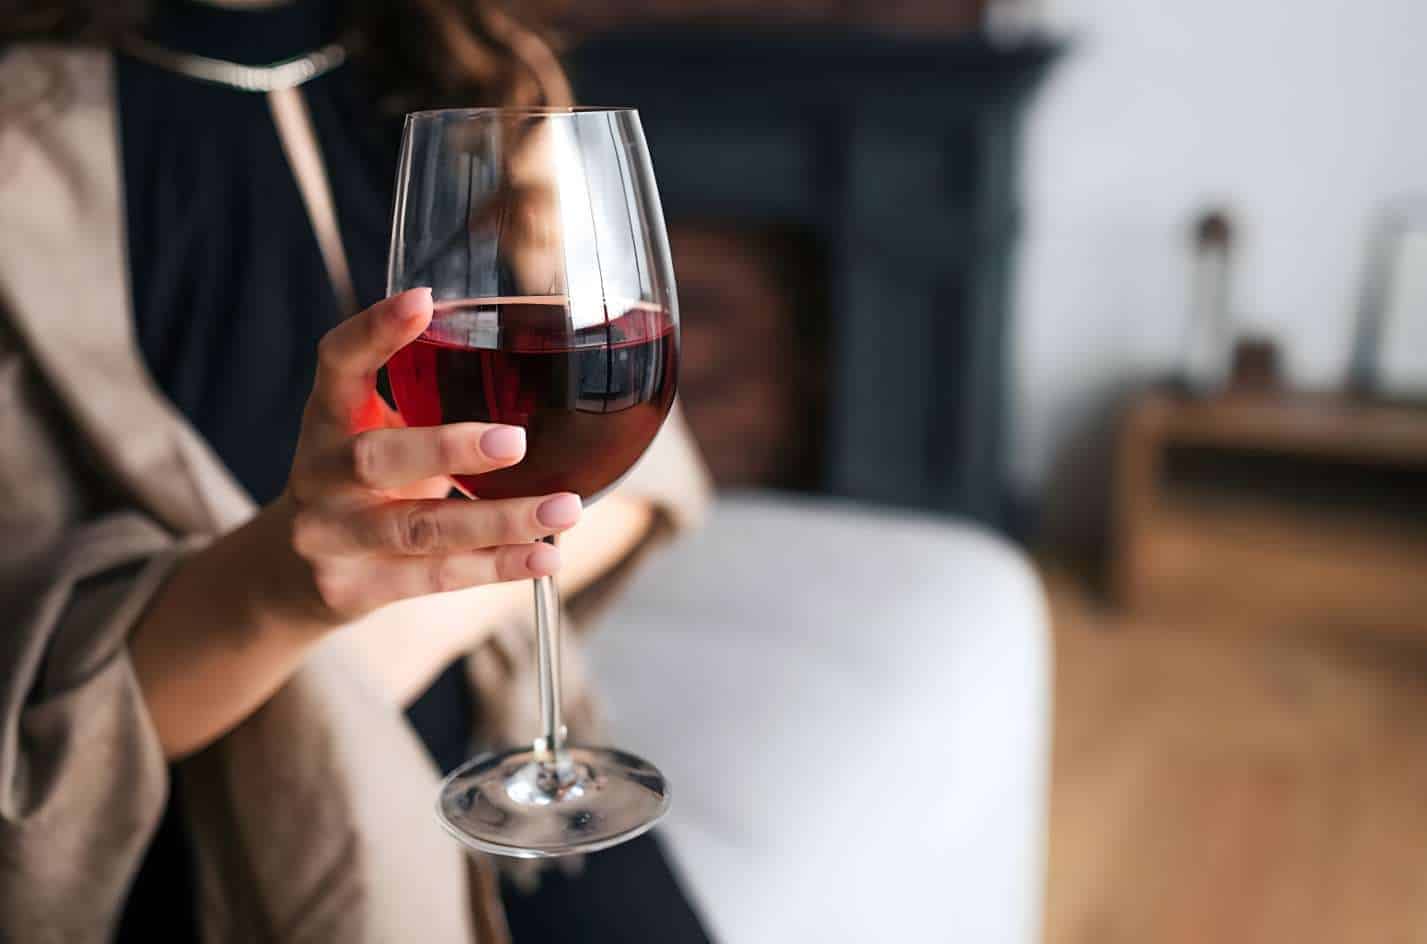 How Many Calories In A Glass Of Red Wine